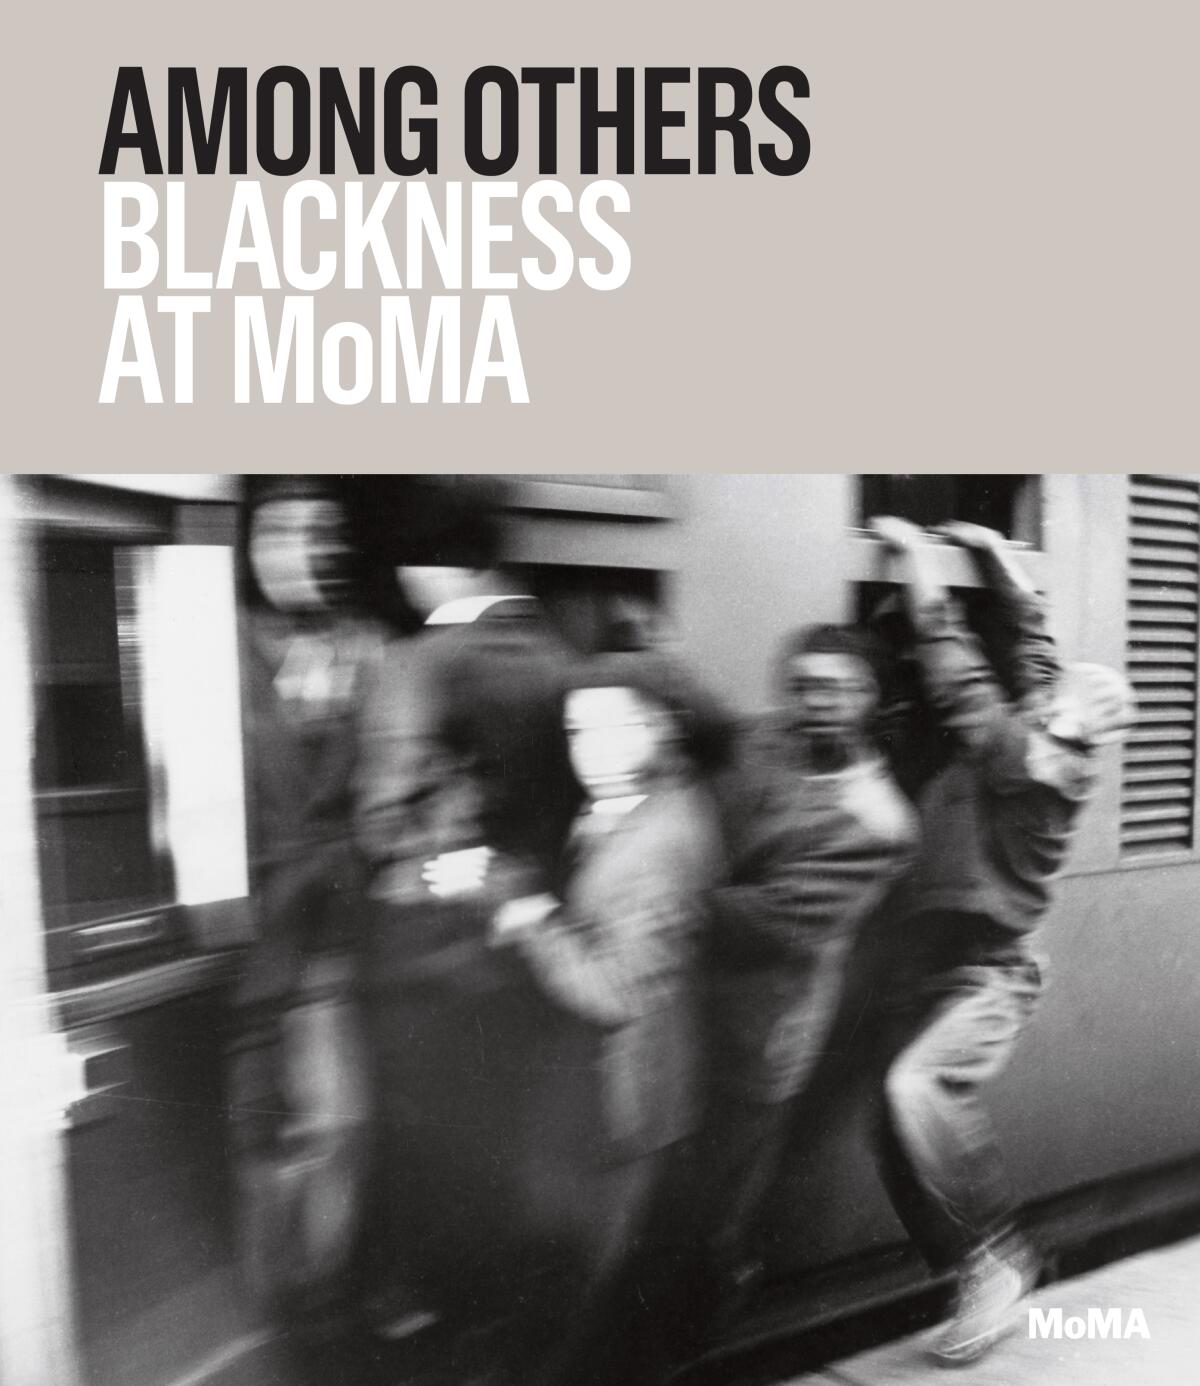 A book cover features a blurry black and white image of men hanging off of a train